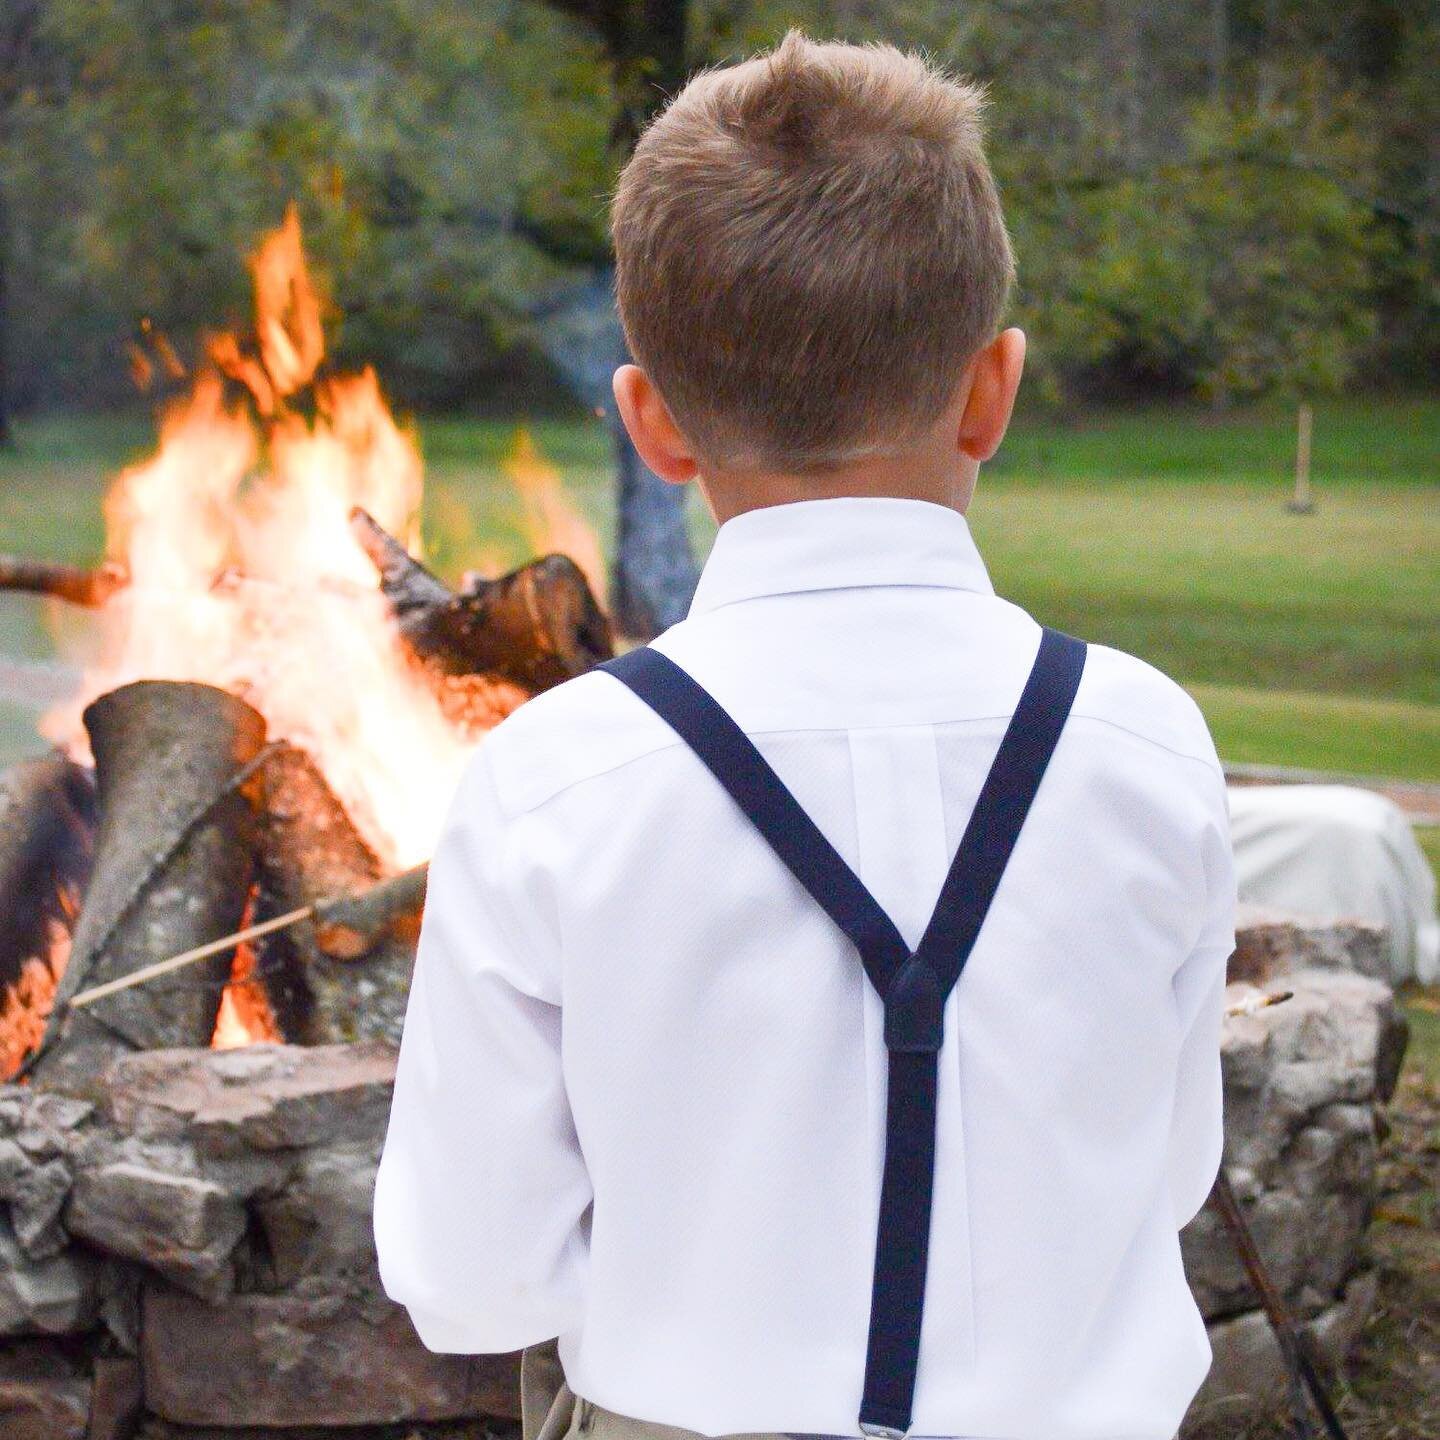 I&rsquo;m remembering this gorgeous wedding from fall 2017 today! This adorable little ring bearer was hanging out by the fire pit for most of the reception. I wish I was by a fire pit today! It&rsquo;s a chilly one! ❄️